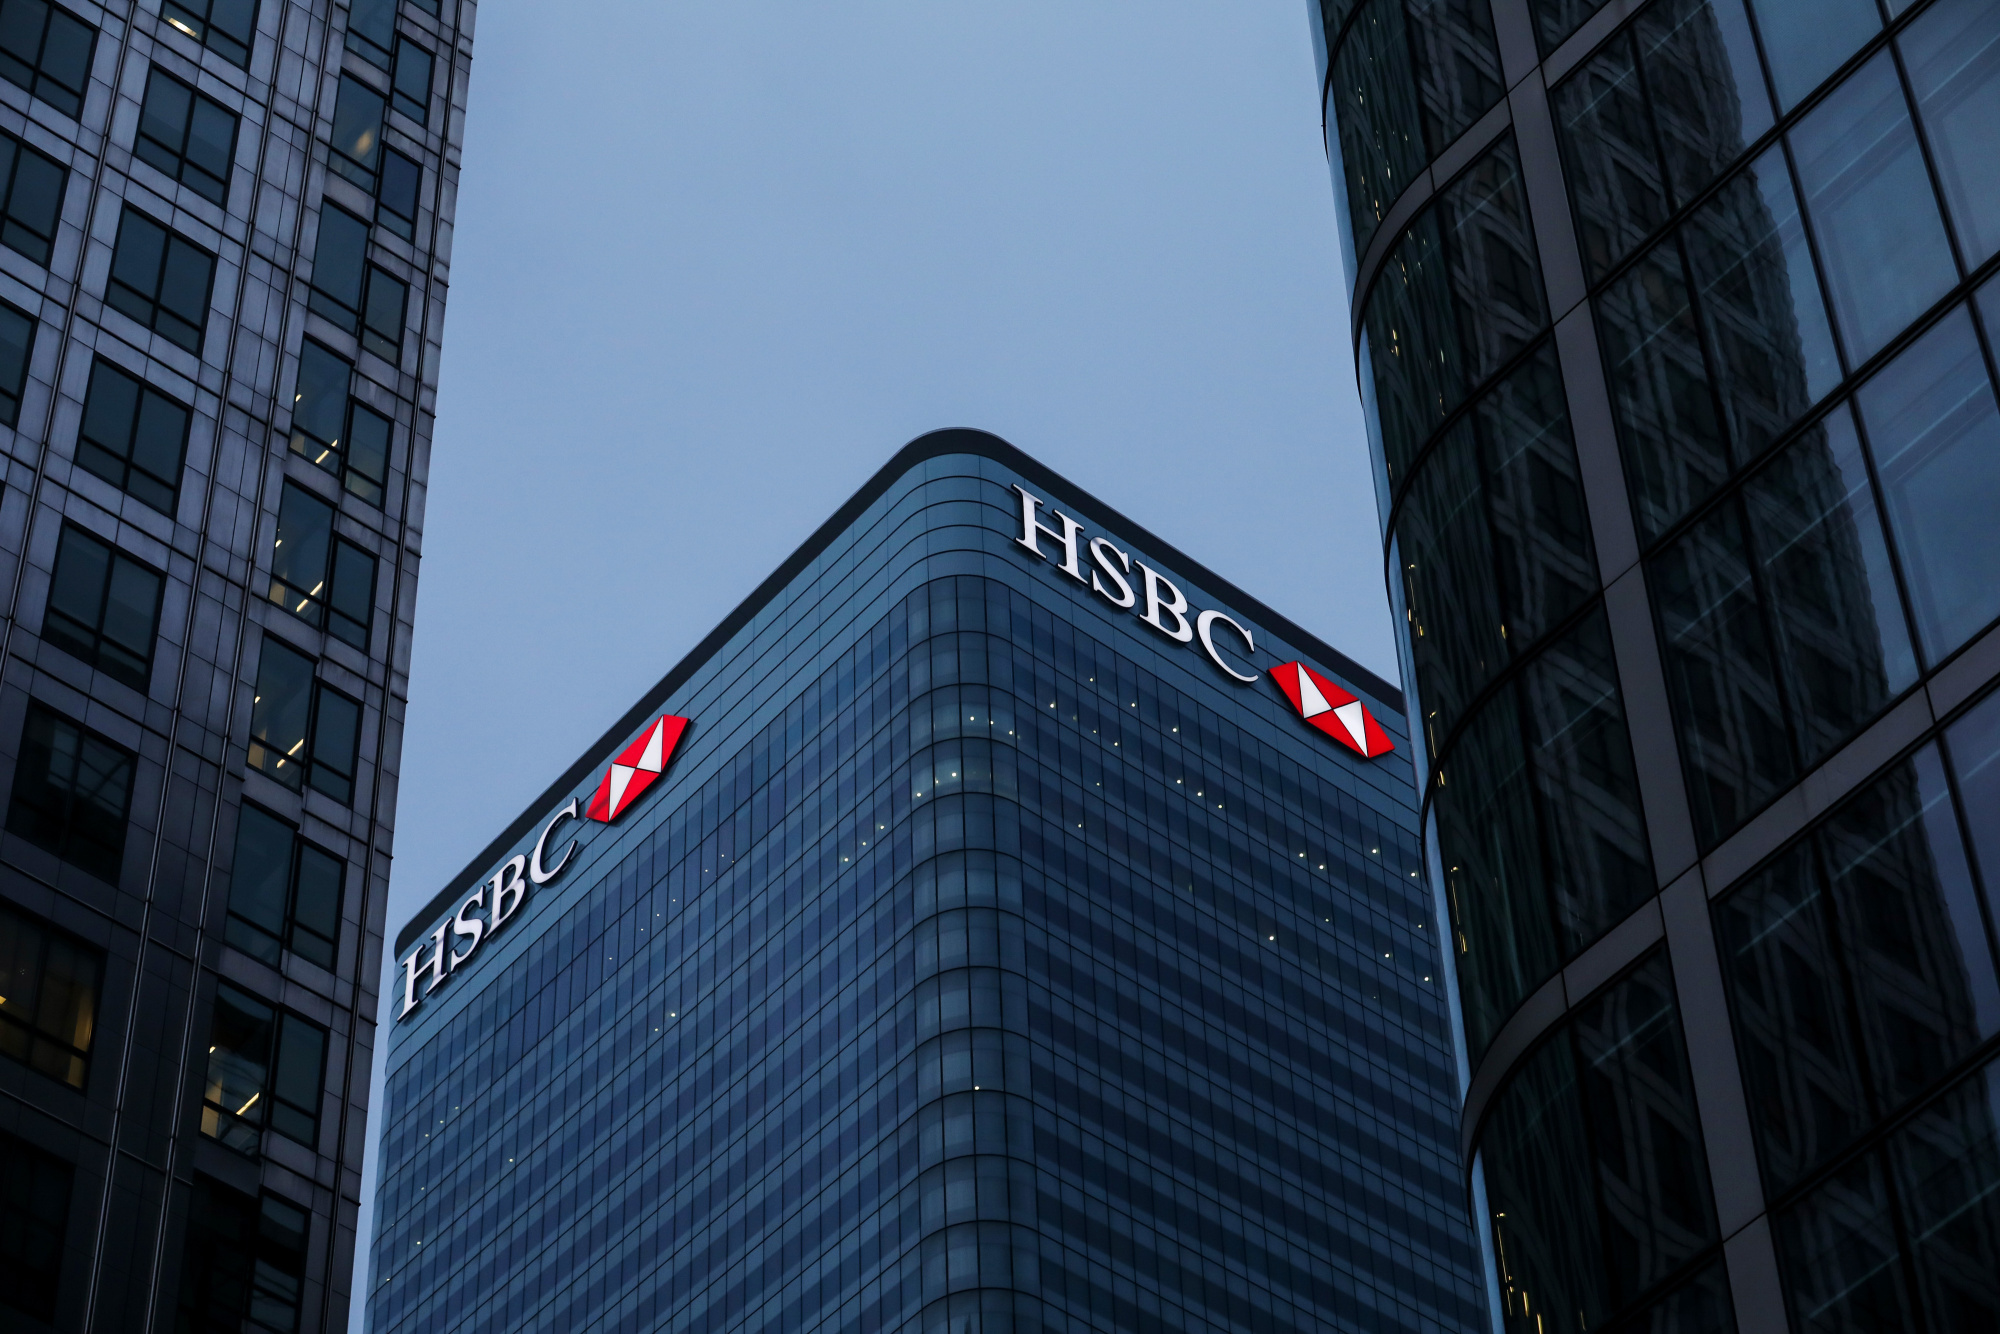 HSBC offices in the Canary Wharf business, financial and shopping district in London.